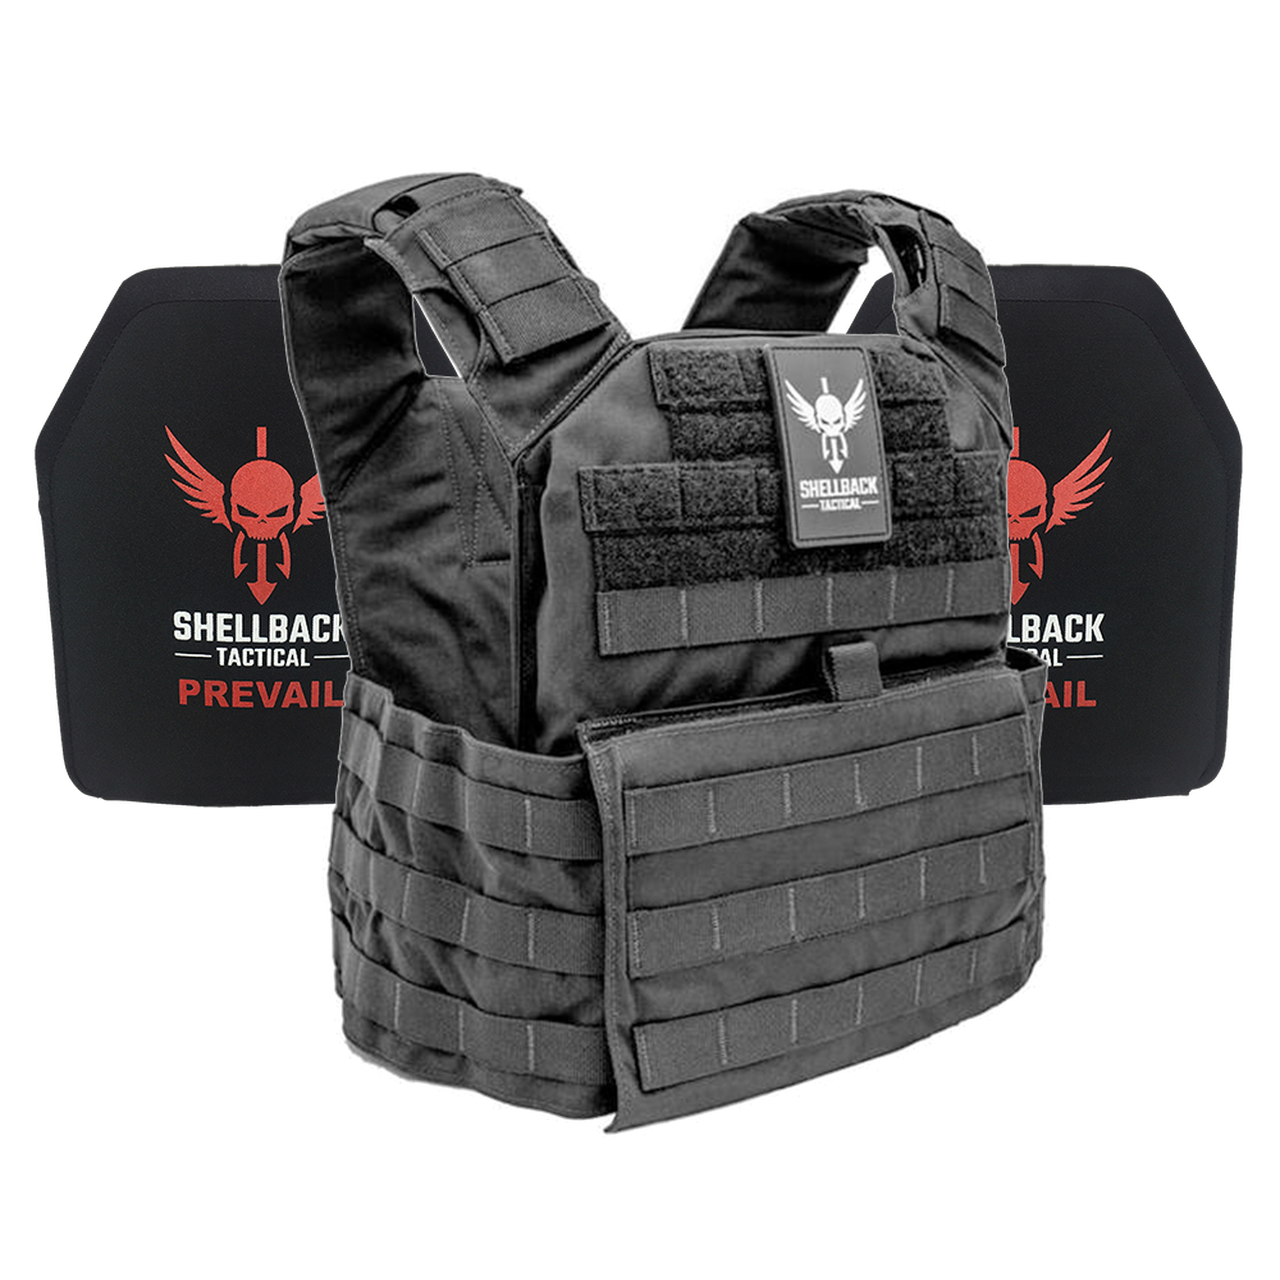 A Shellback Tactical Banshee Active Shooter Kit with Level III Single Curve 10 x 12 Hard Armor vest with a red and black logo on it.